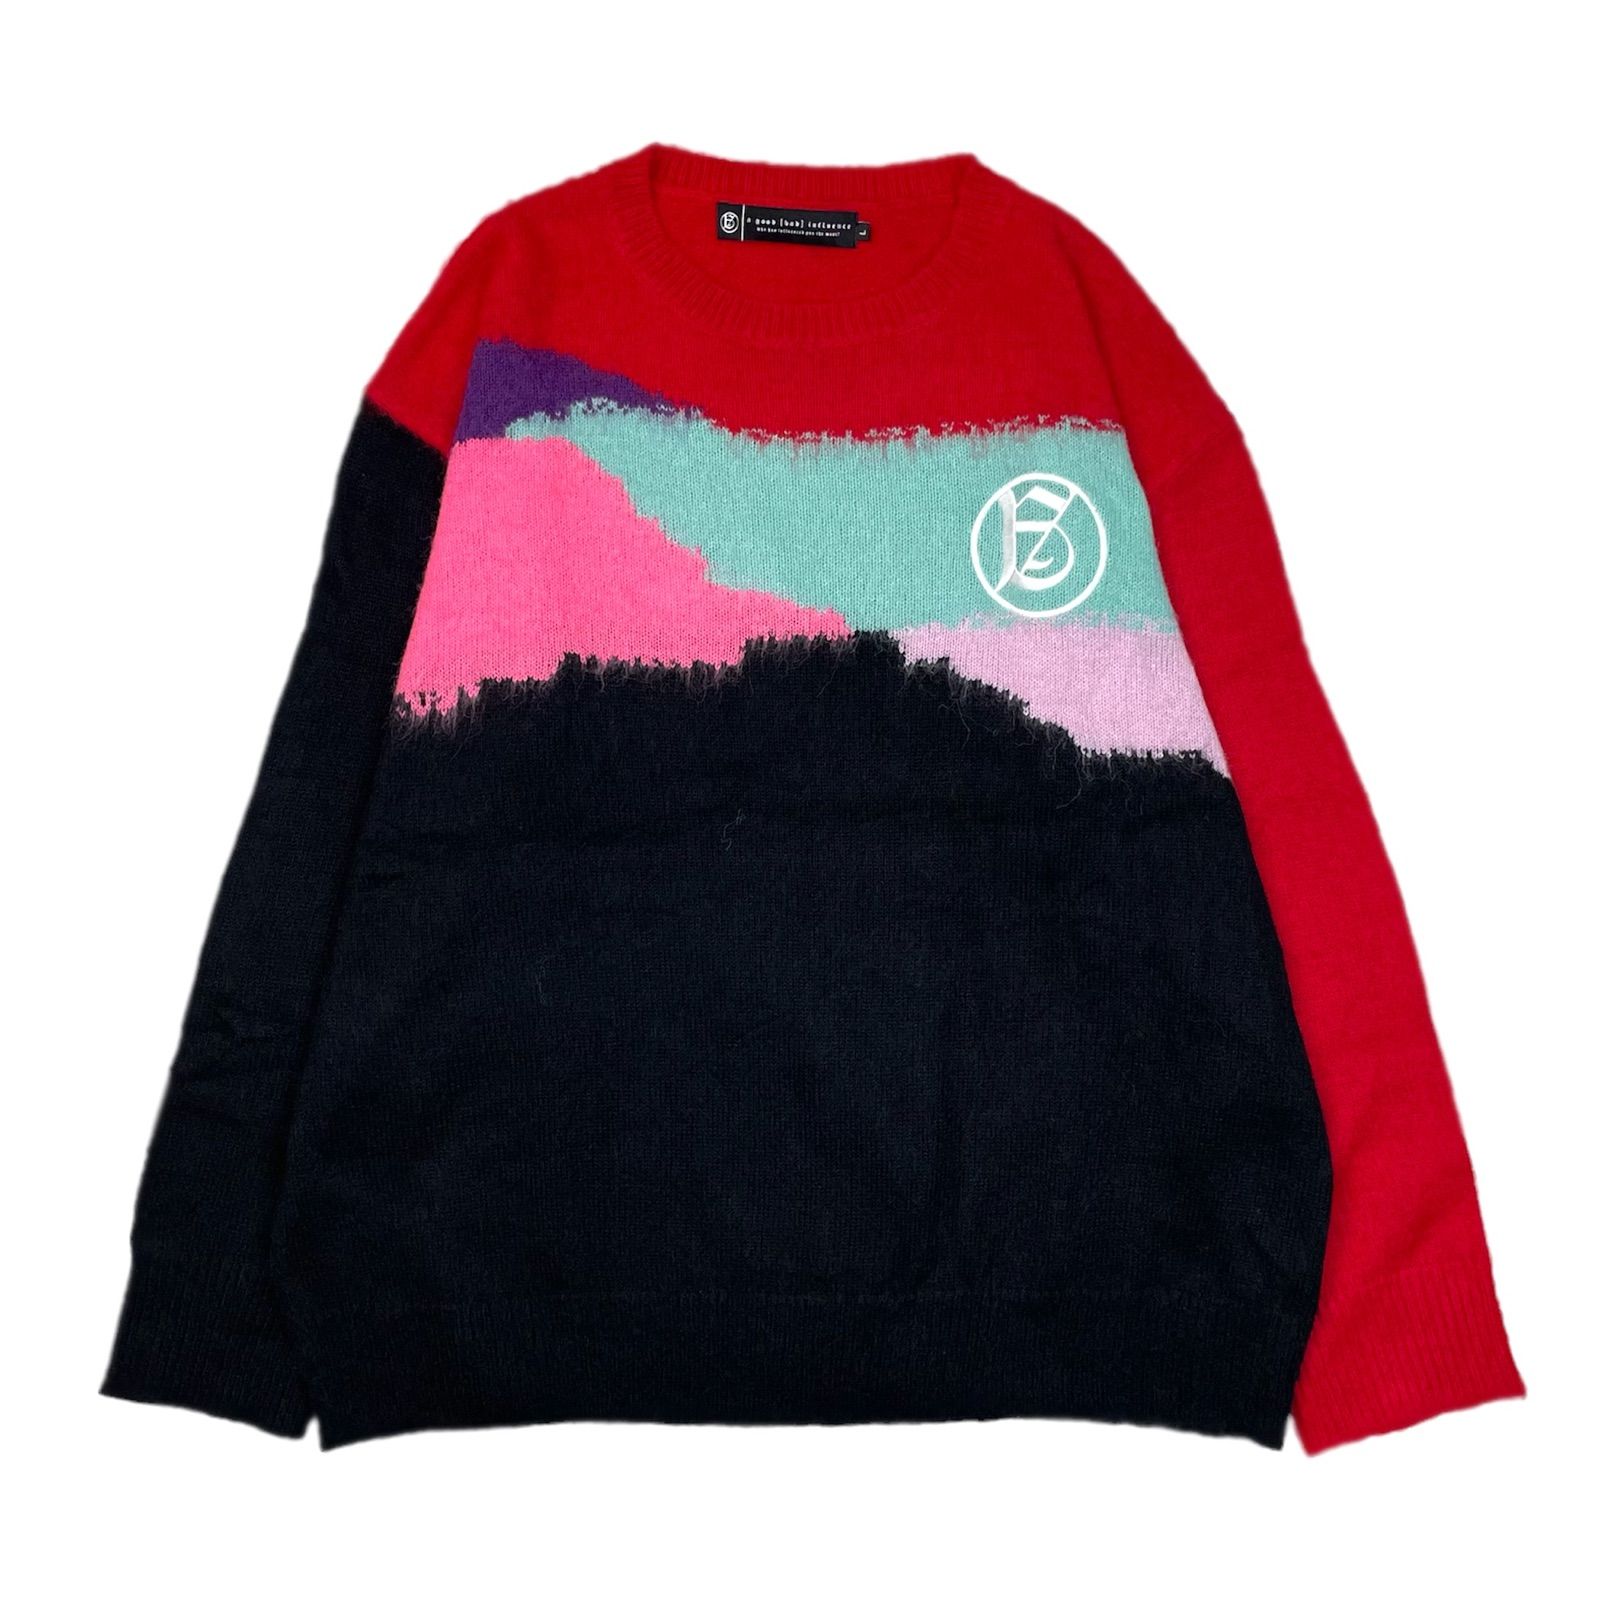 THE WORLD IS YOURS ザ ワールド イズ ユアーズ BIG LOGO MOHAIR KNIT